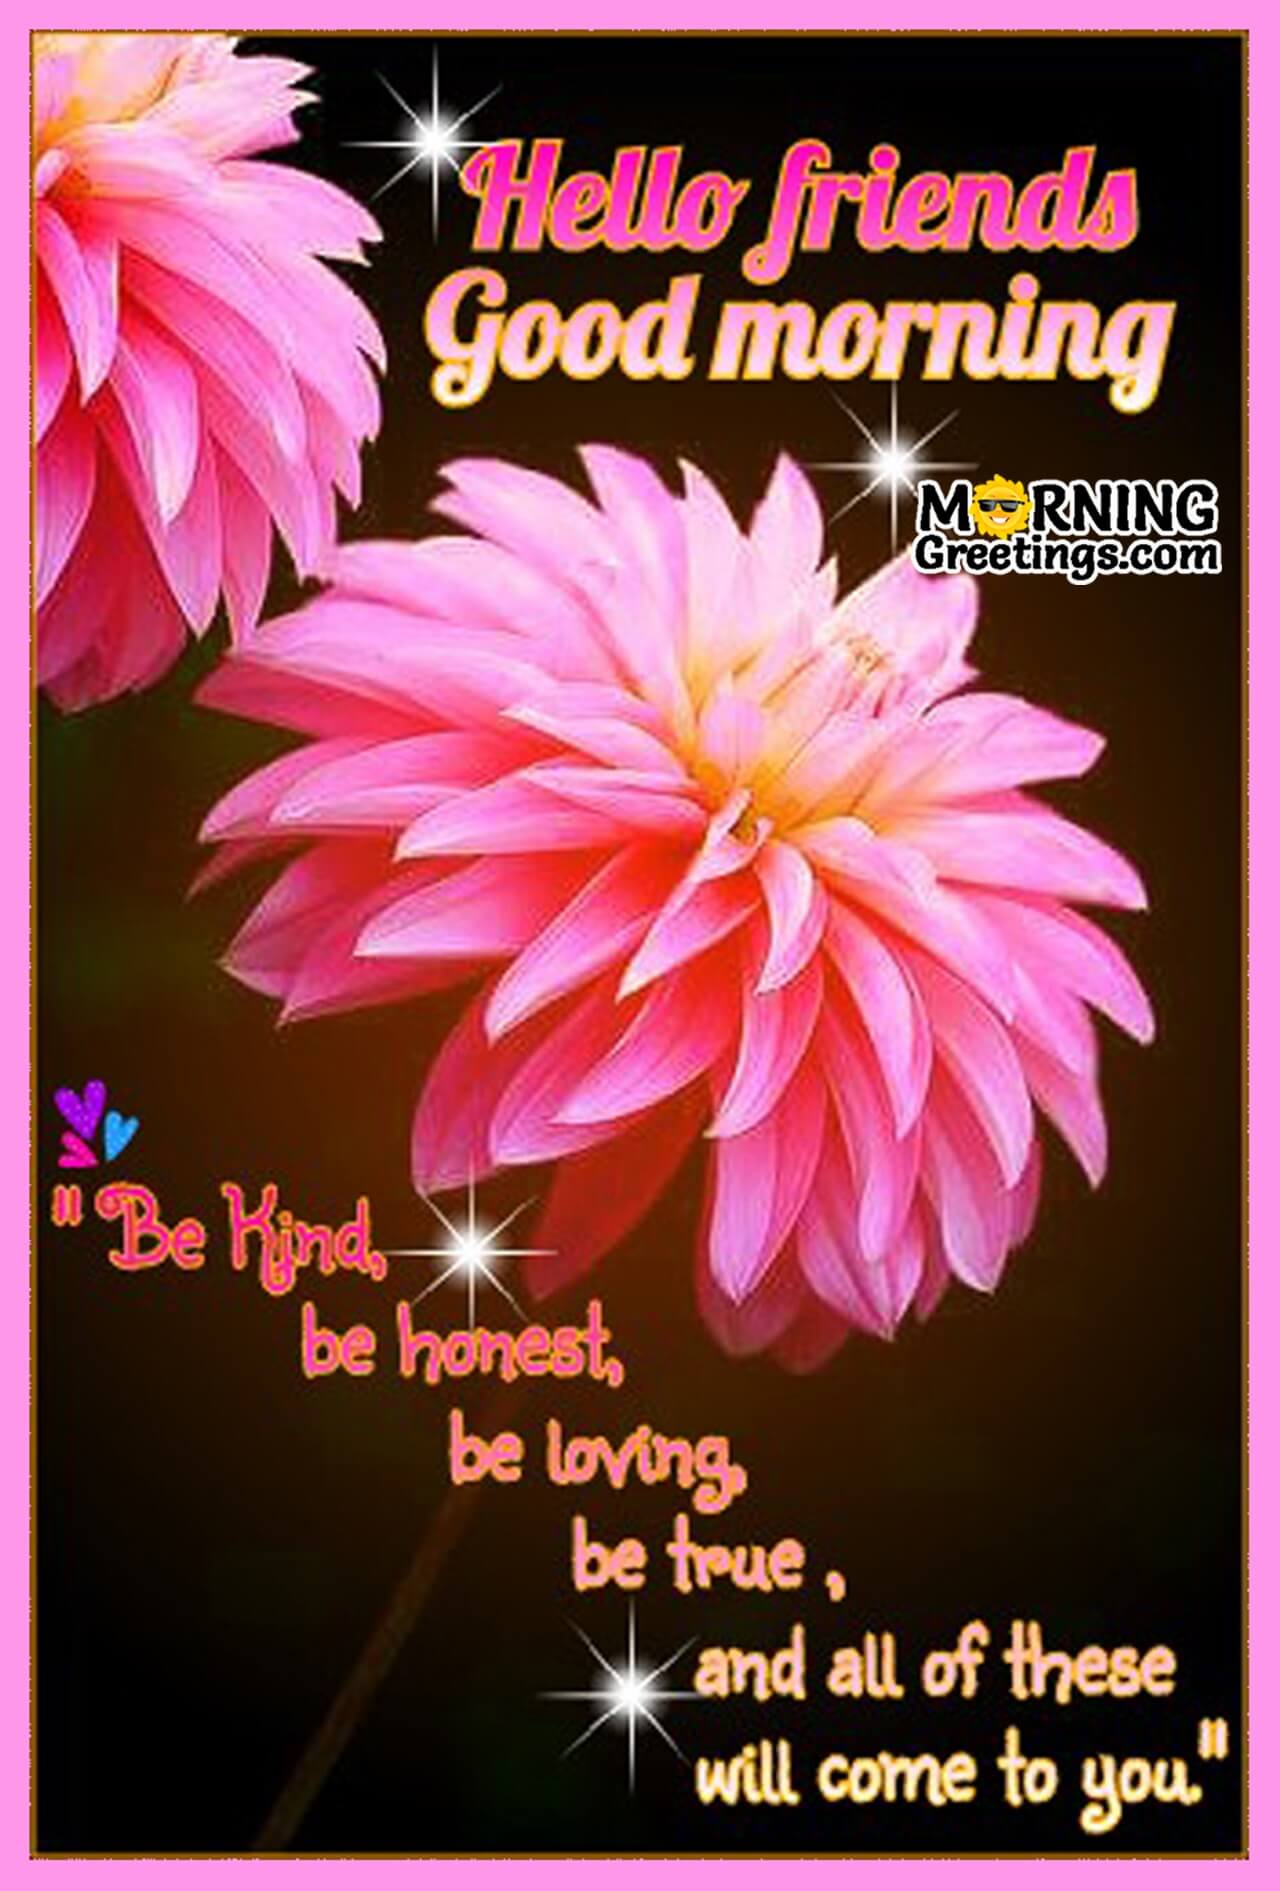 10 Best Morning Messages For Friend - Morning Greetings – Morning